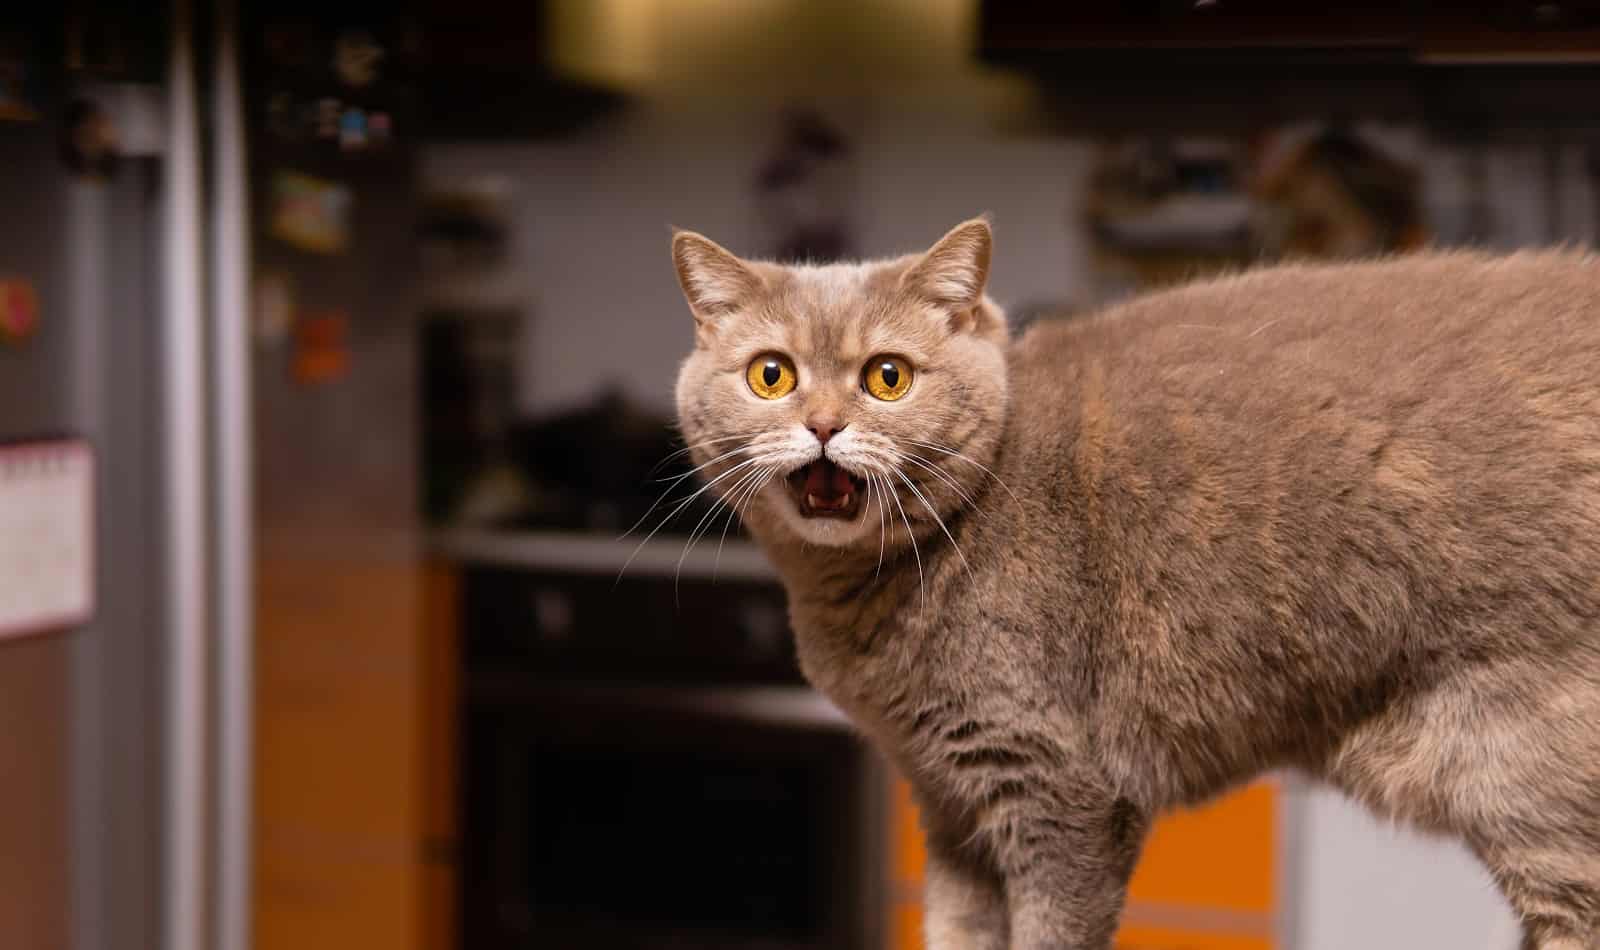 Are you wondering how to quiet your talkative cat because your kitty is driving you crazy with constant meowing? Check out these 7 superb tips!